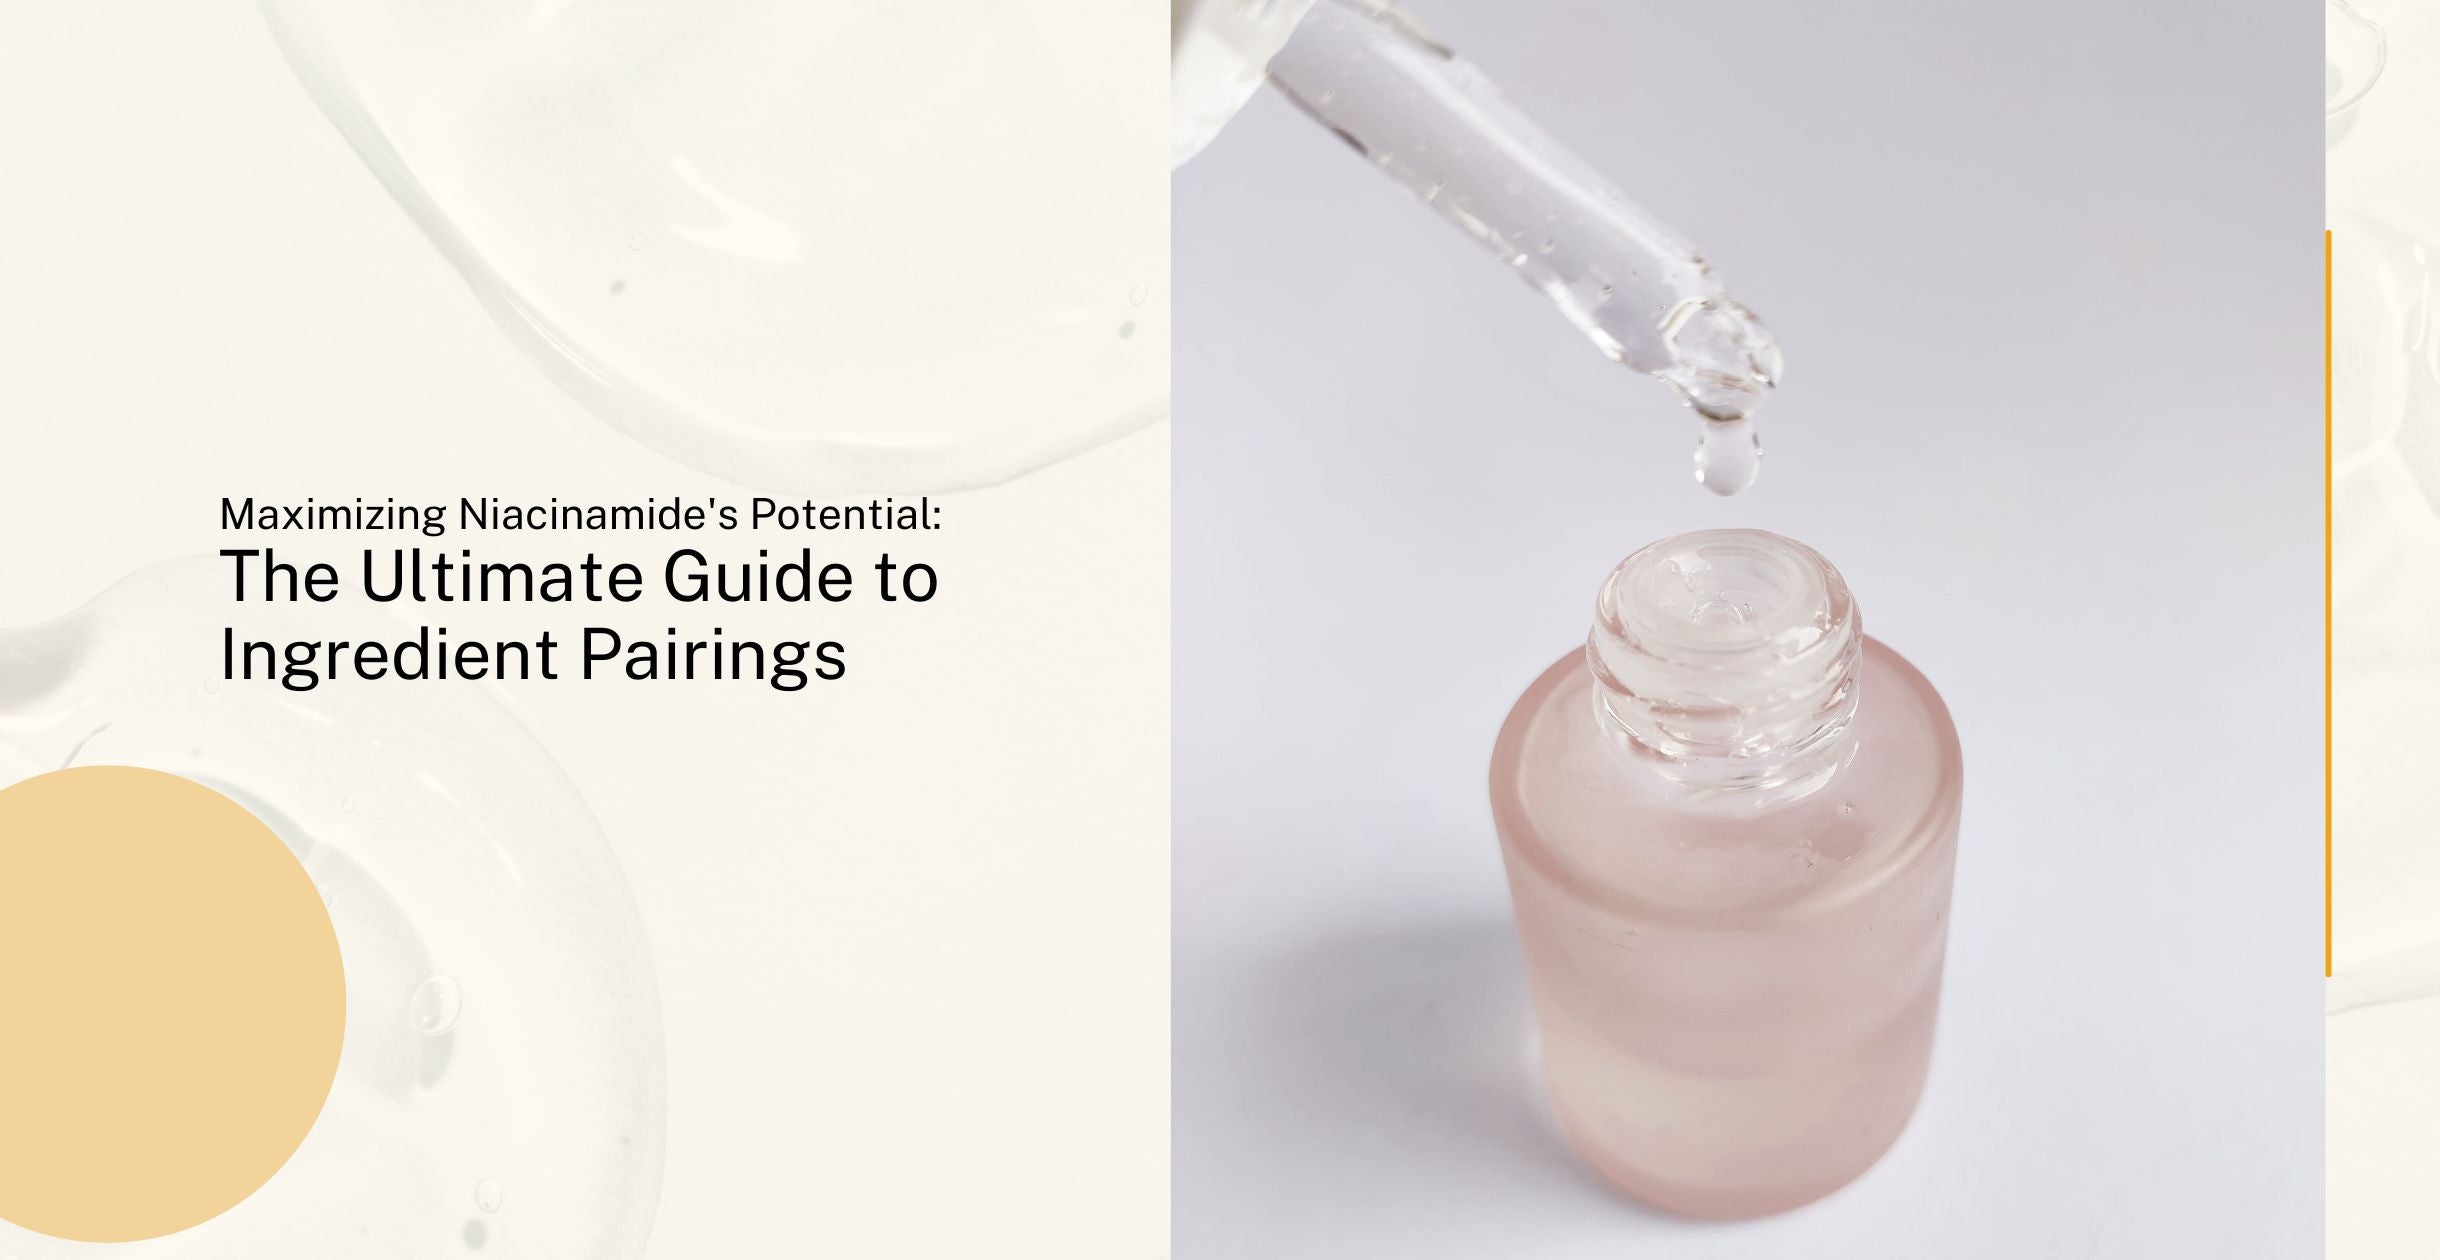 Maximizing Niacinamide's Potential: The Ultimate Guide to Ingredient Pairings